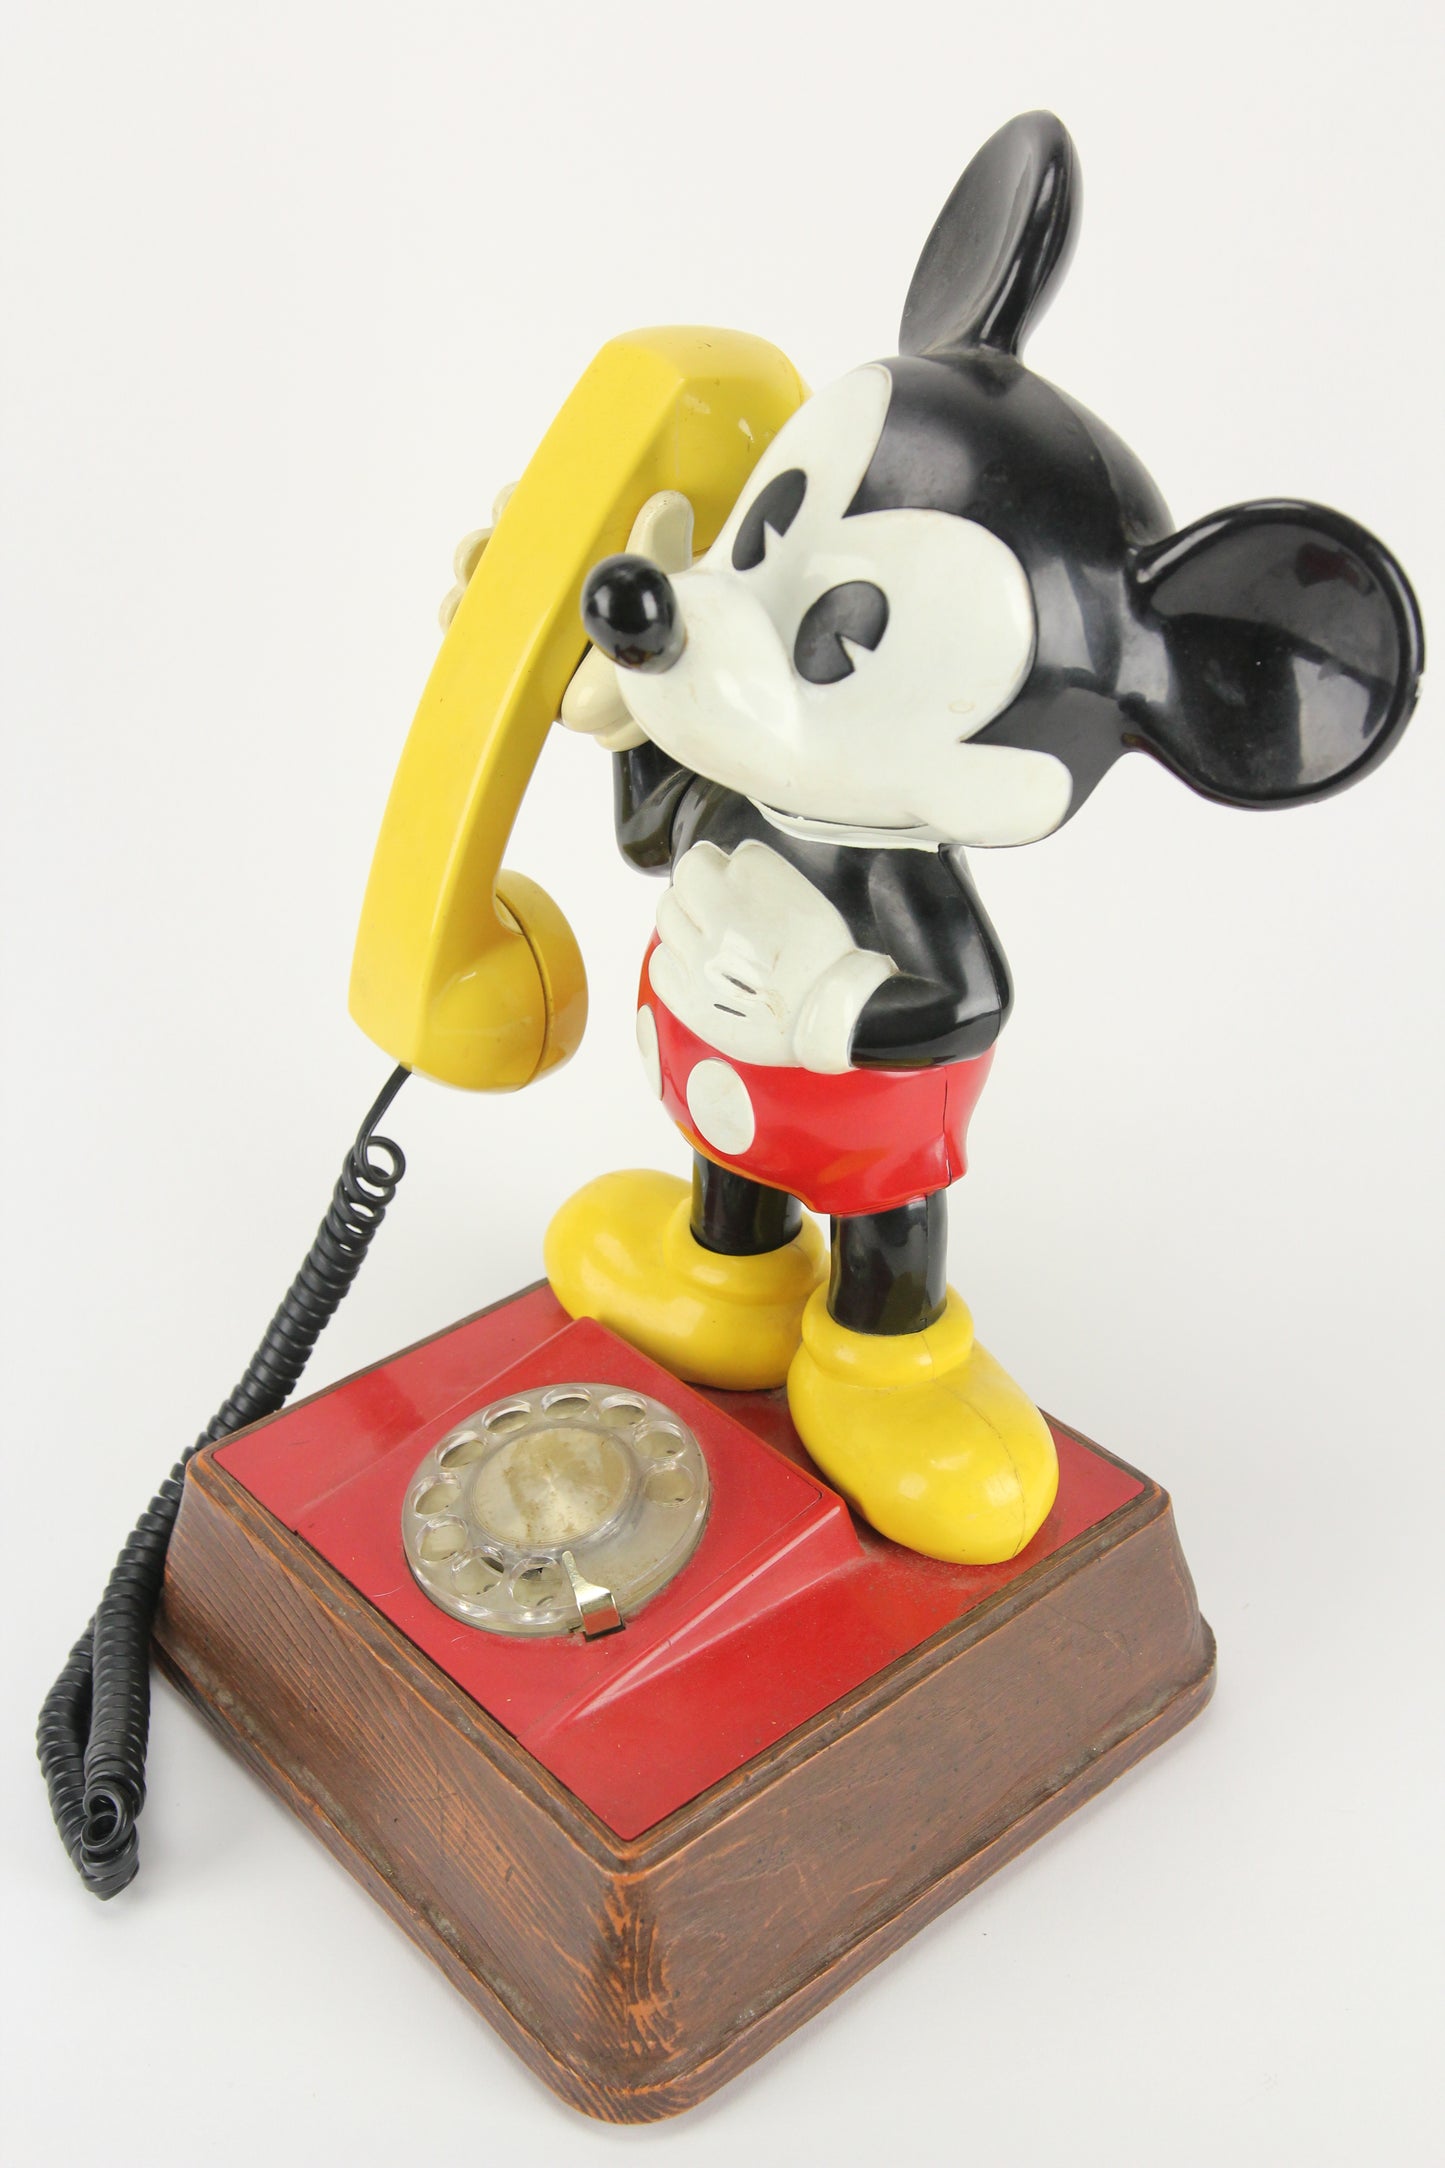 The Mickey Mouse Rotary Phone by American Telecommunications Corporation, 1976